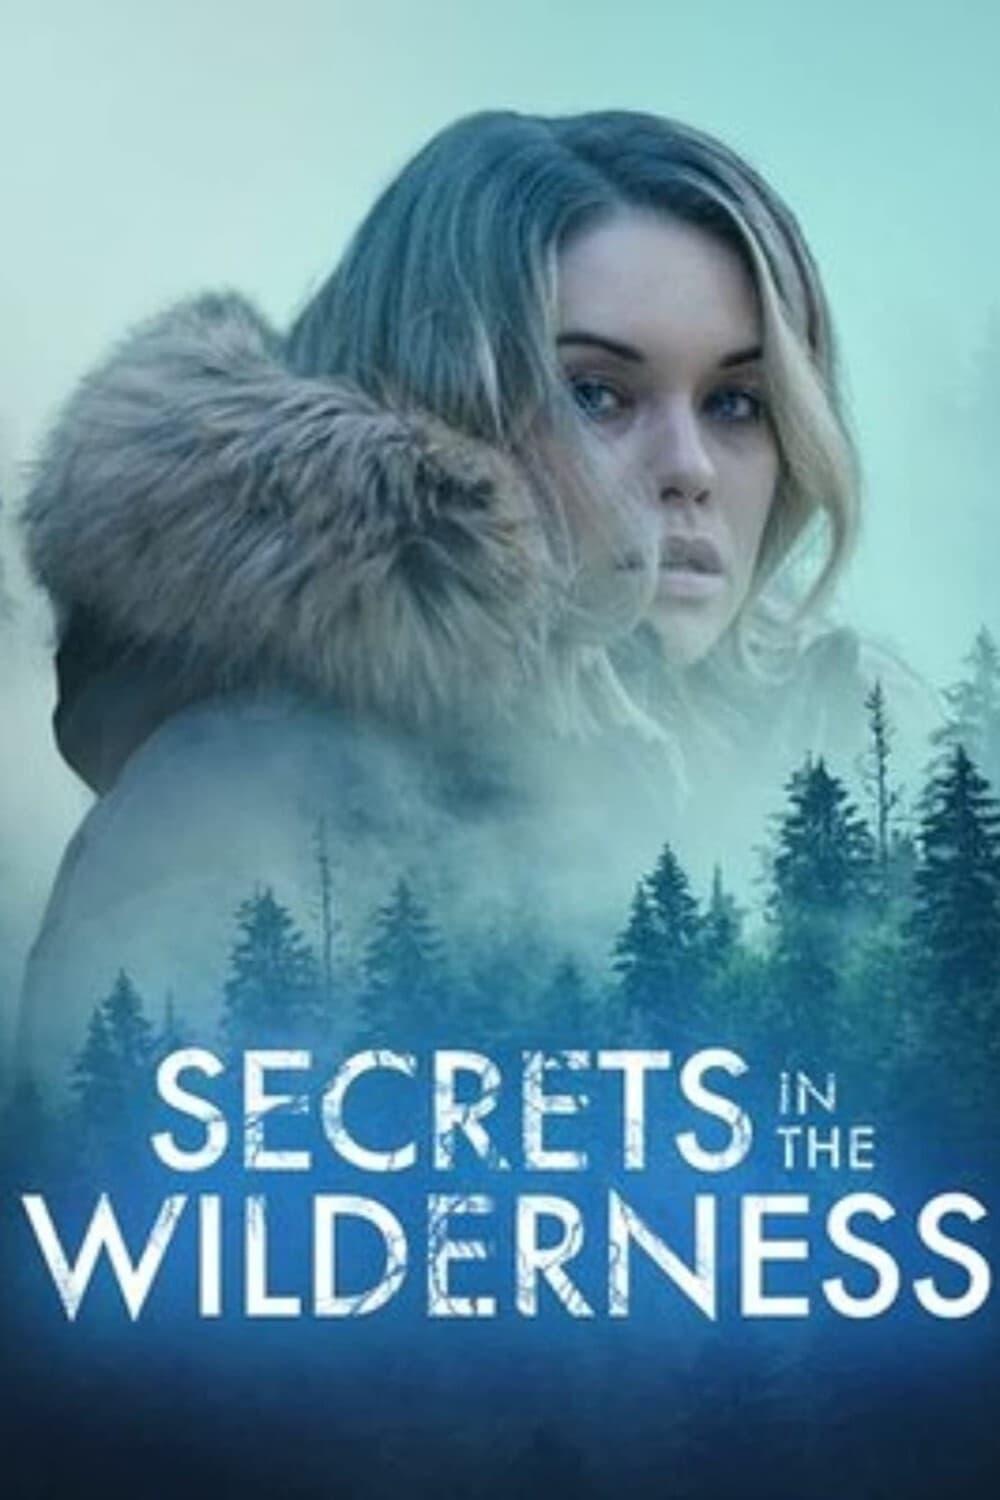 Secrets in the Wilderness poster